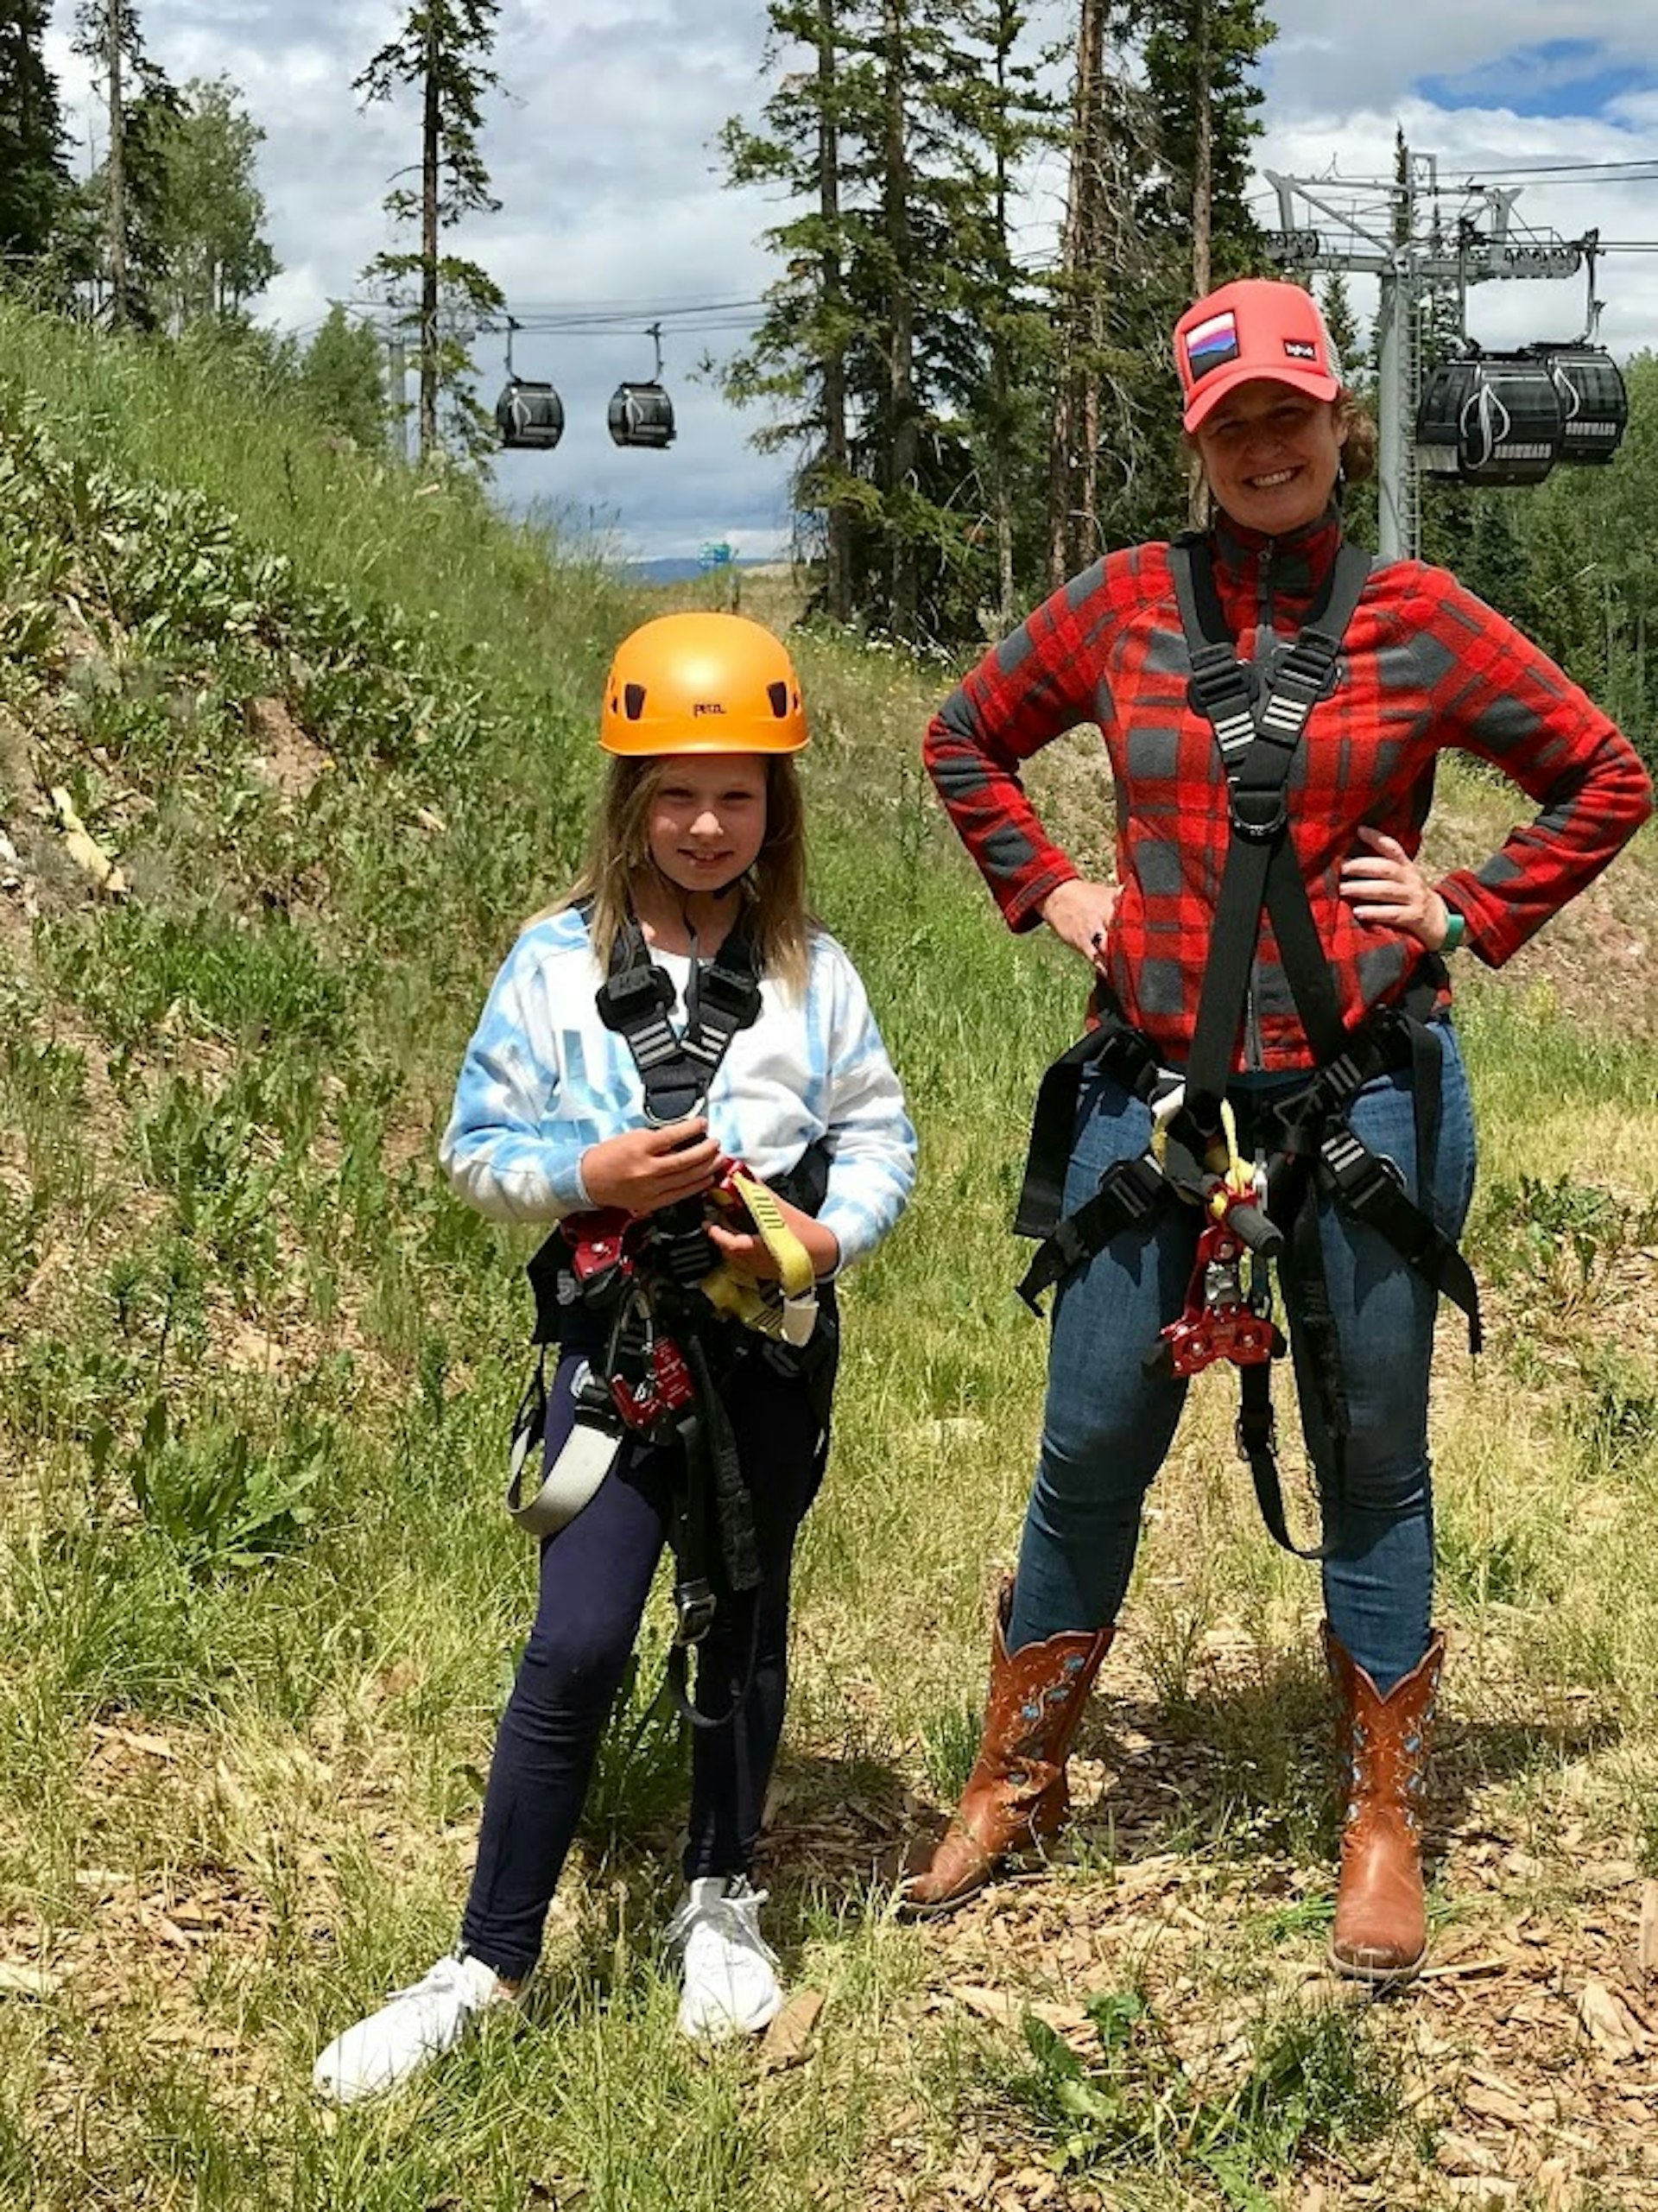 A woman and her daughter strapped in harnesses with smiles on their faces